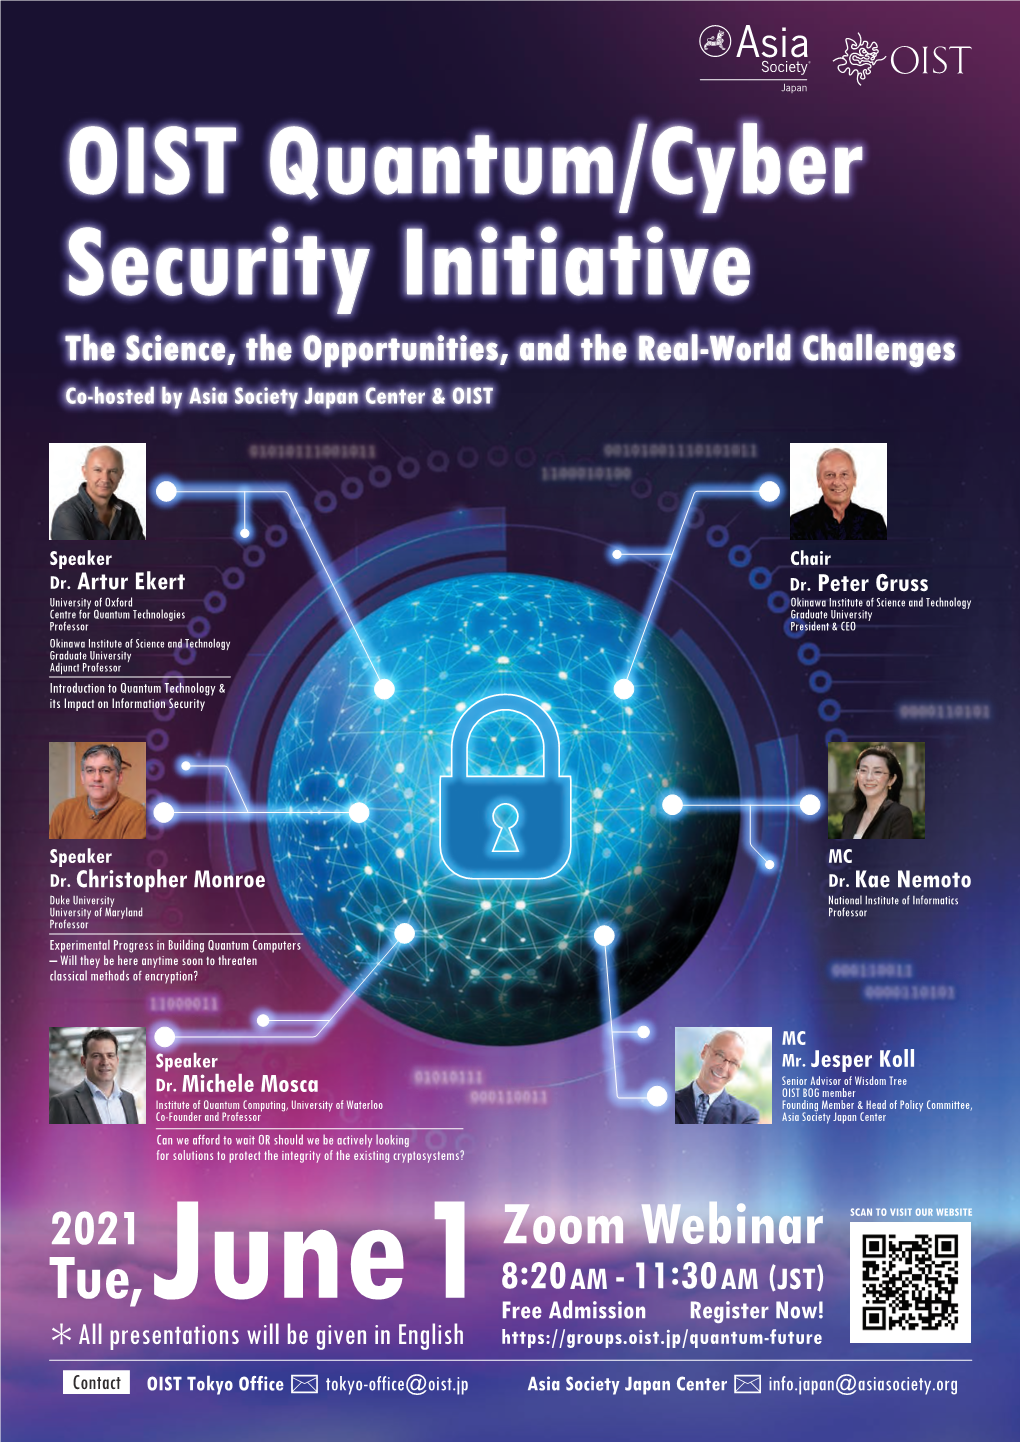 OIST Quantum/Cyber Security Initiative the Science, the Opportunities, and the Real-World Challenges Co-Hosted by Asia Society Japan Center & OIST